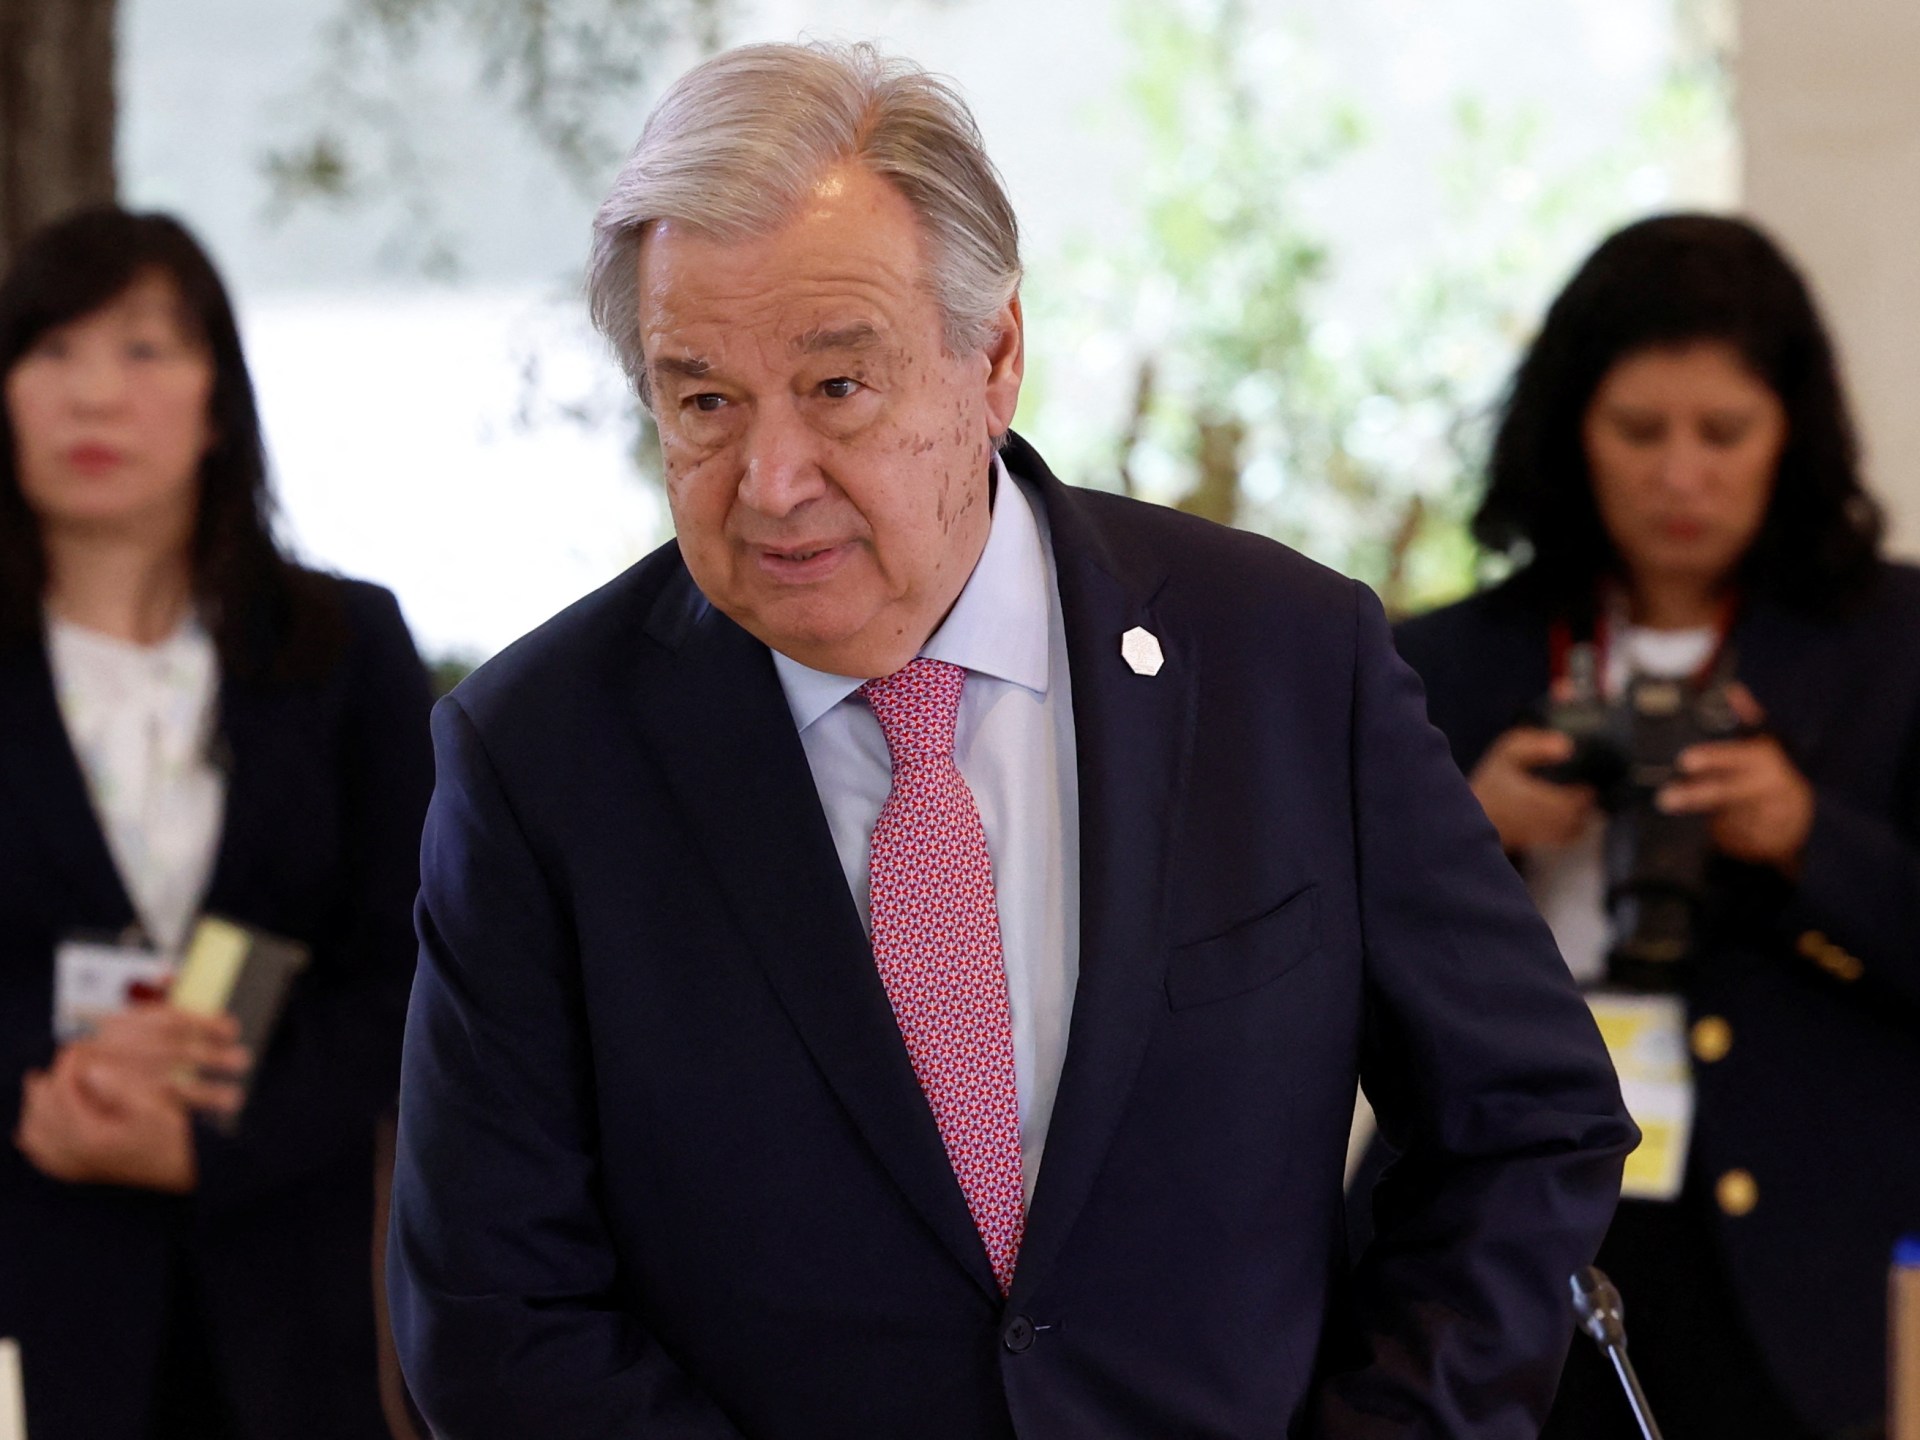 UN chief slams Israel for dooming prospects for two-state solution | Israel-Palestine conflict News